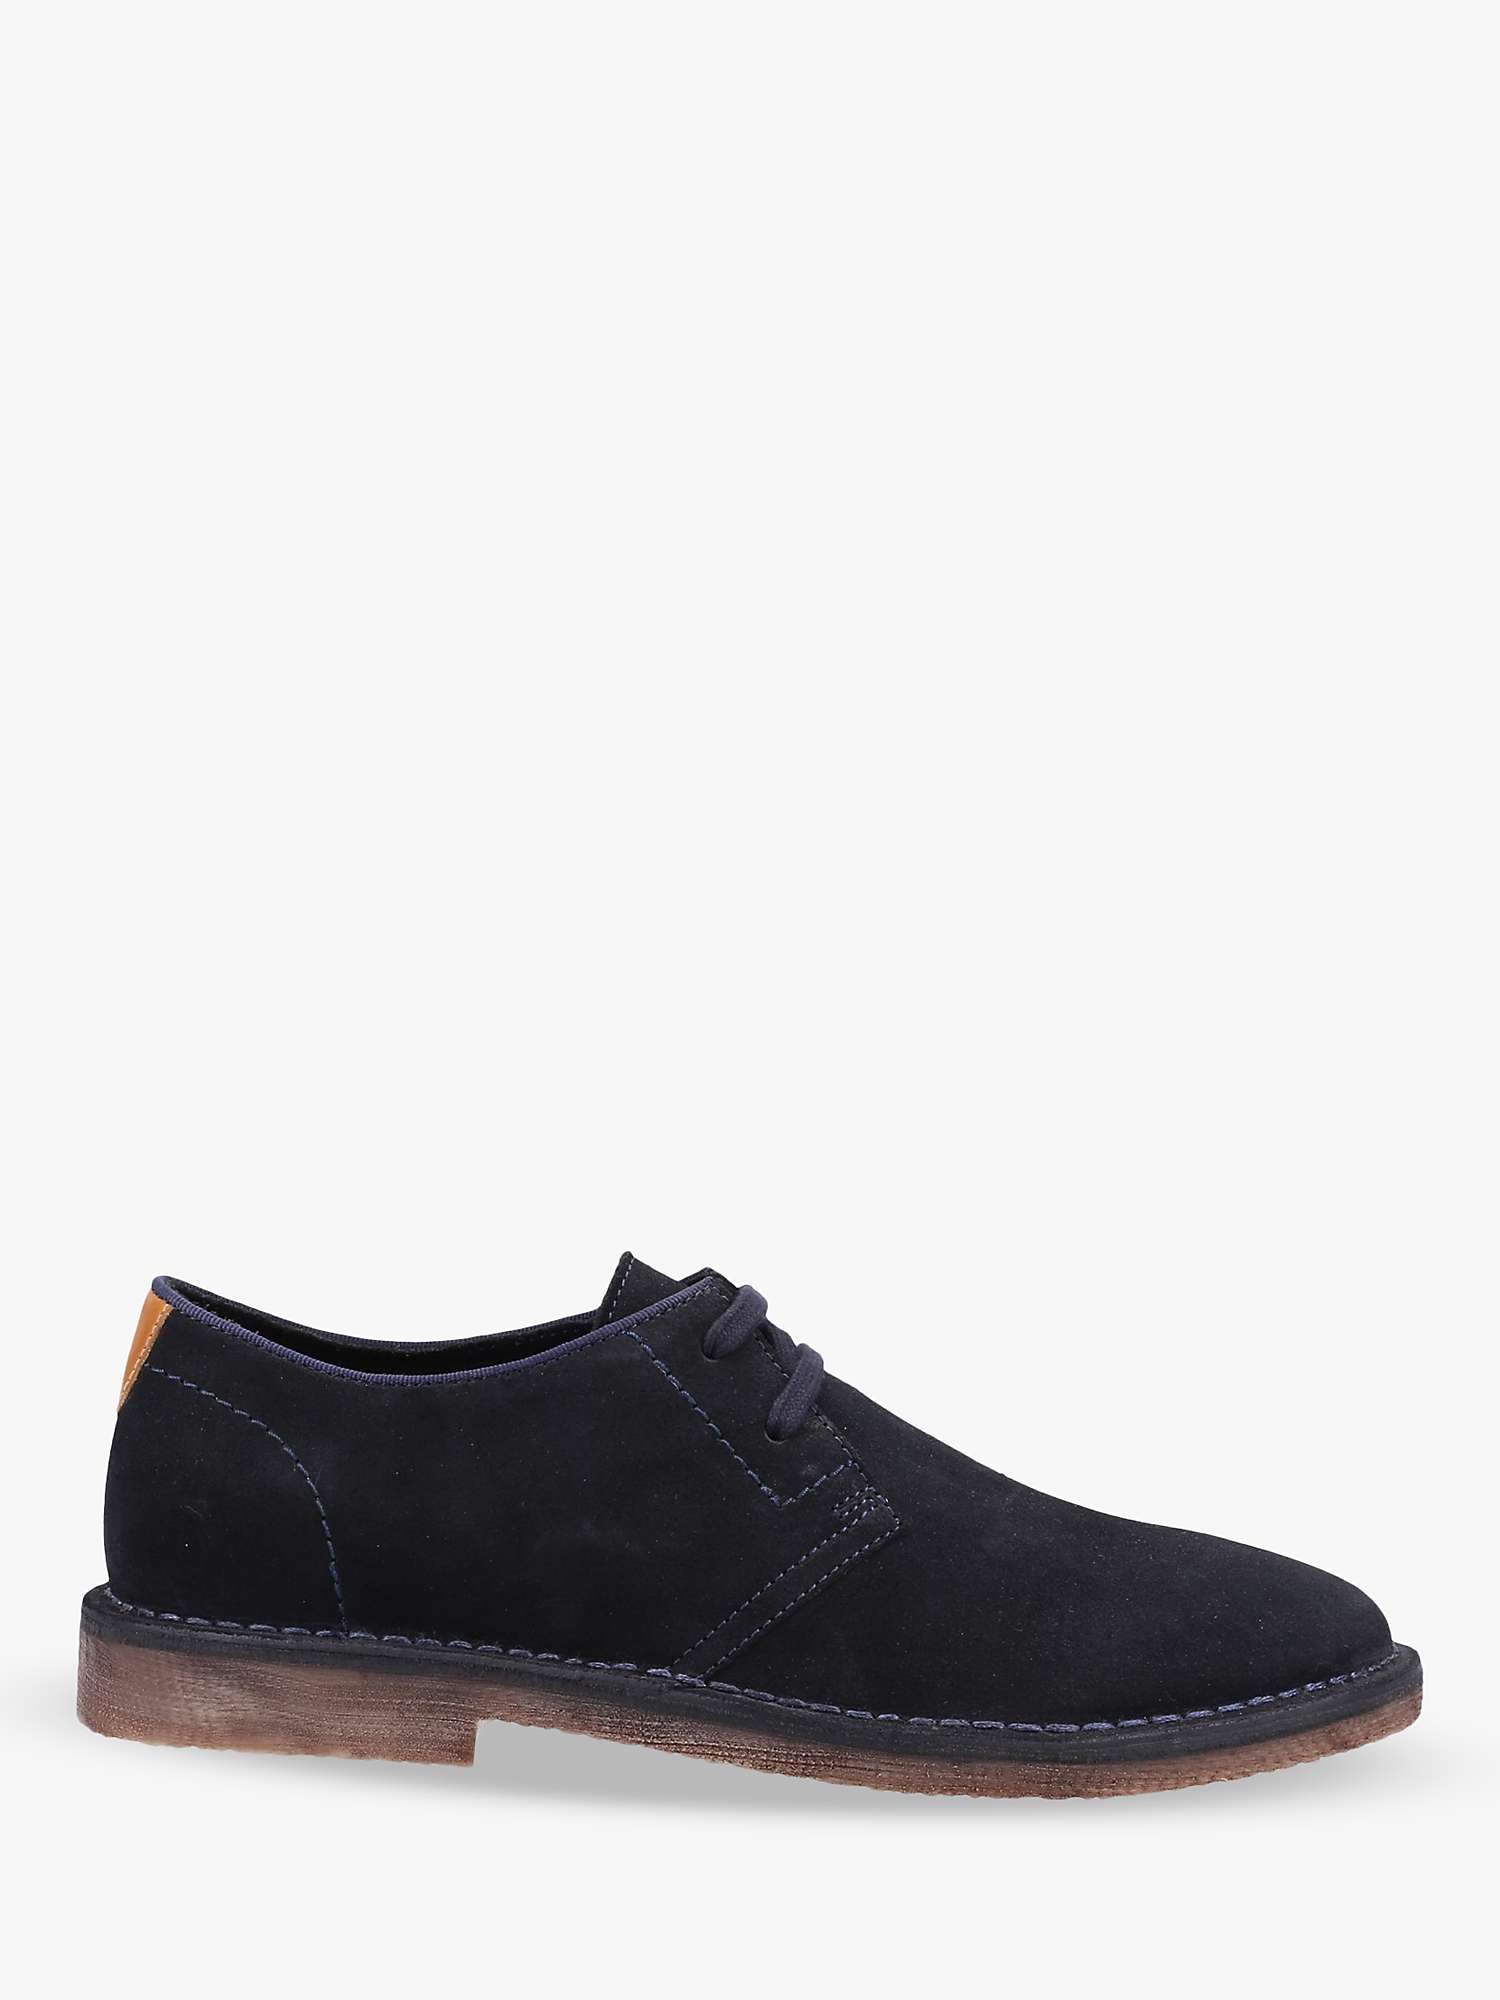 Buy Hush Puppies Scout Suede Lace Up Shoes Online at johnlewis.com